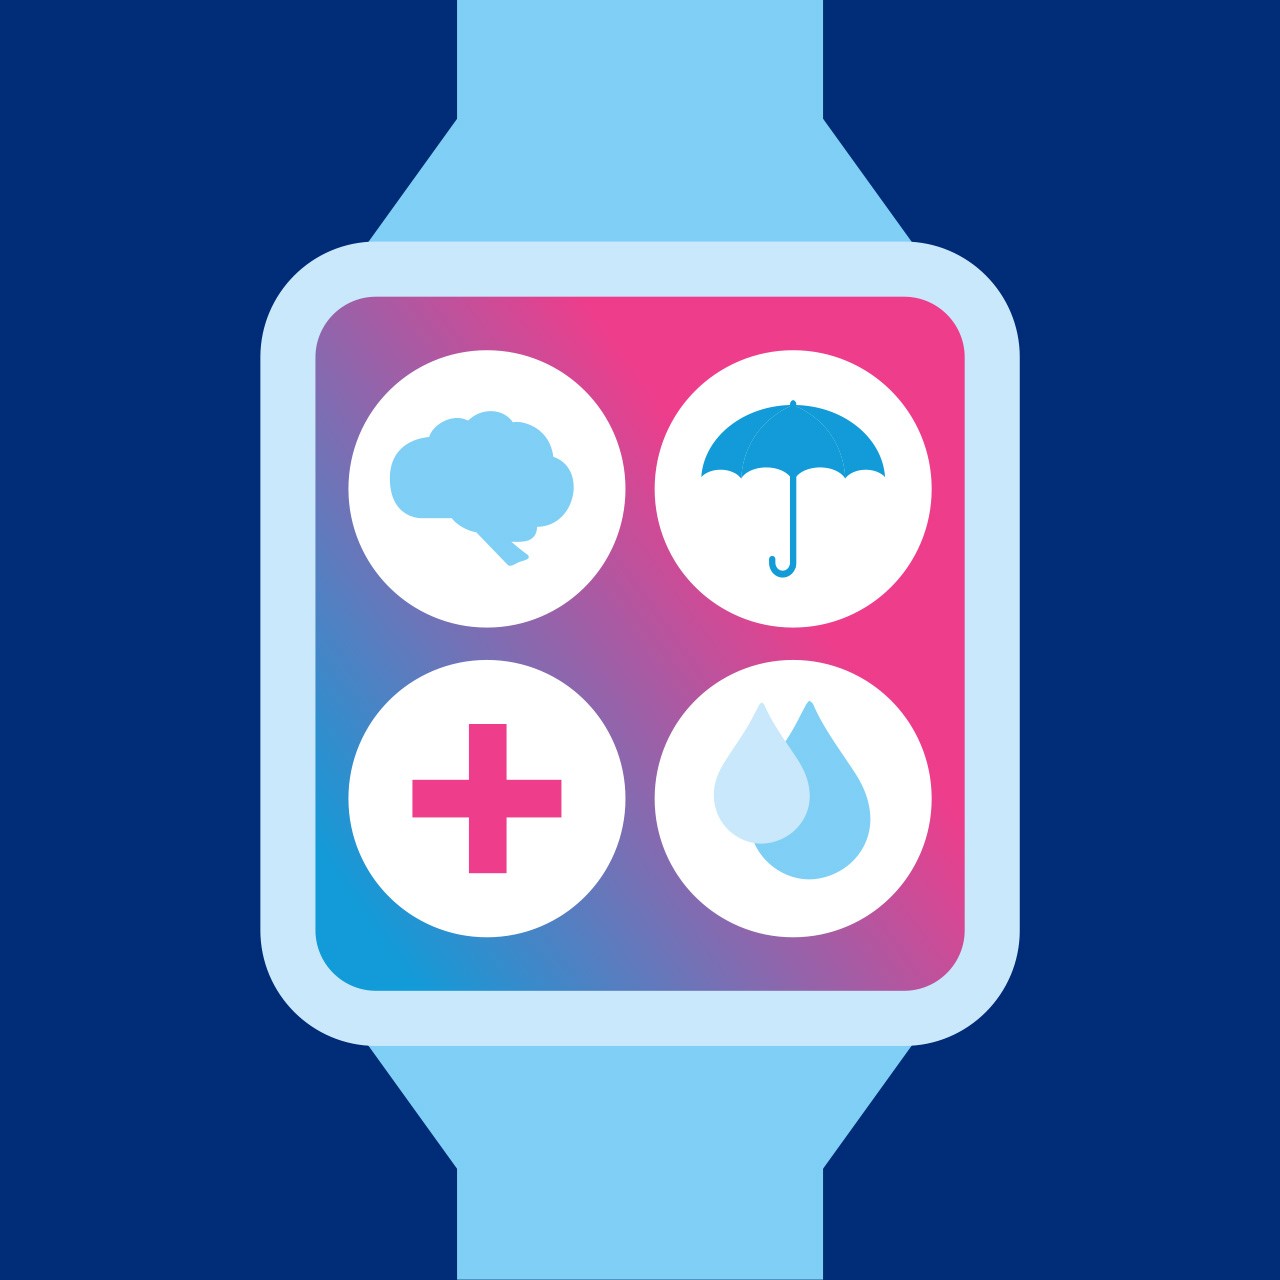 Watch with icons with dark blue background